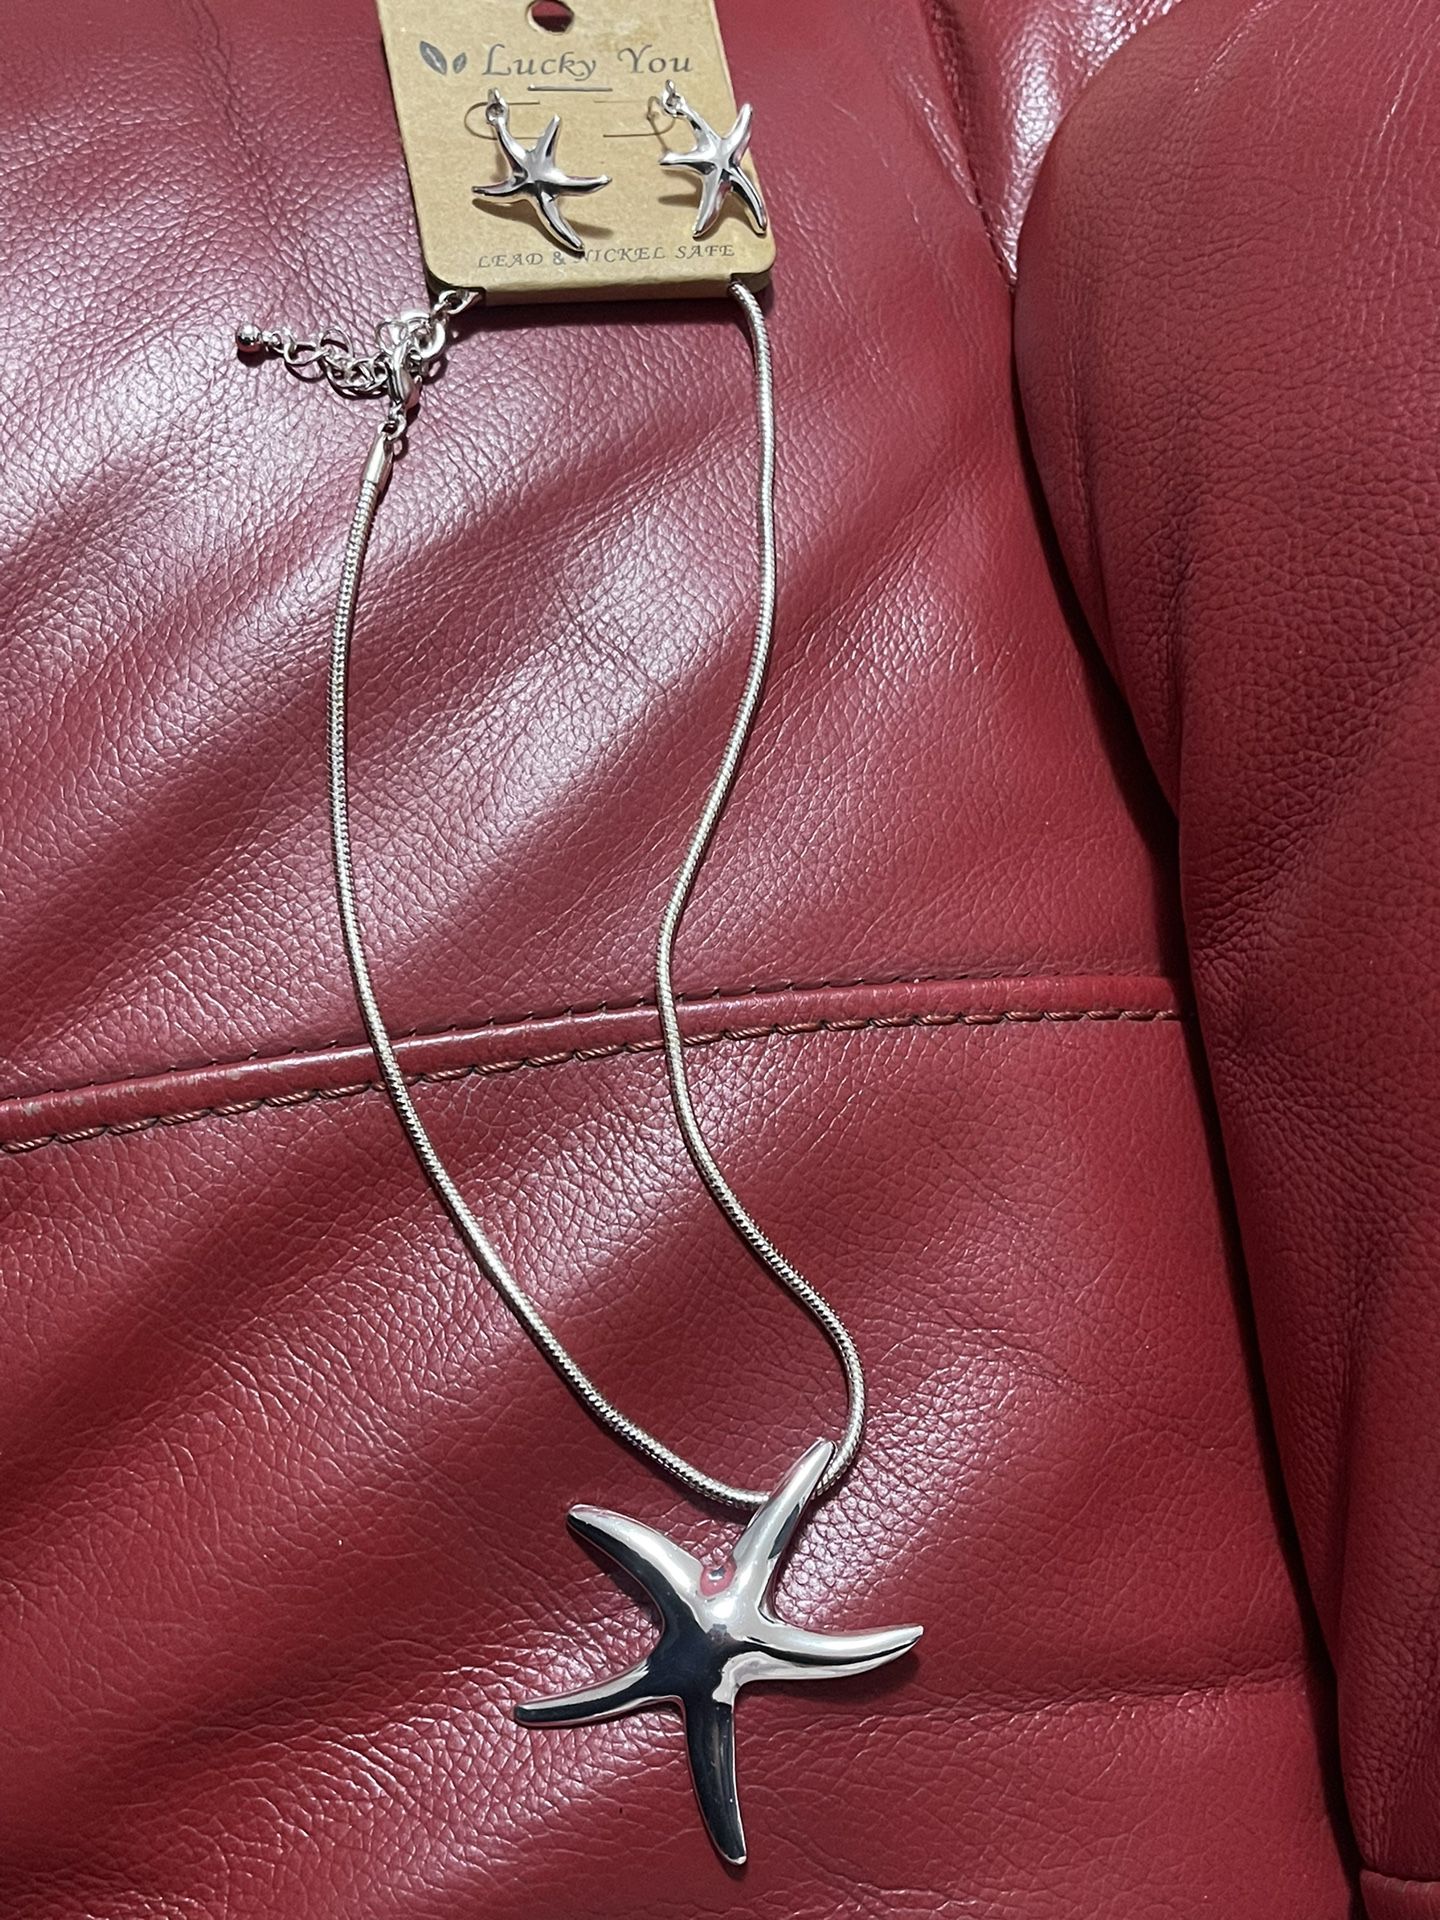 Silver and Gold Starfish Necklace And Earrings Set